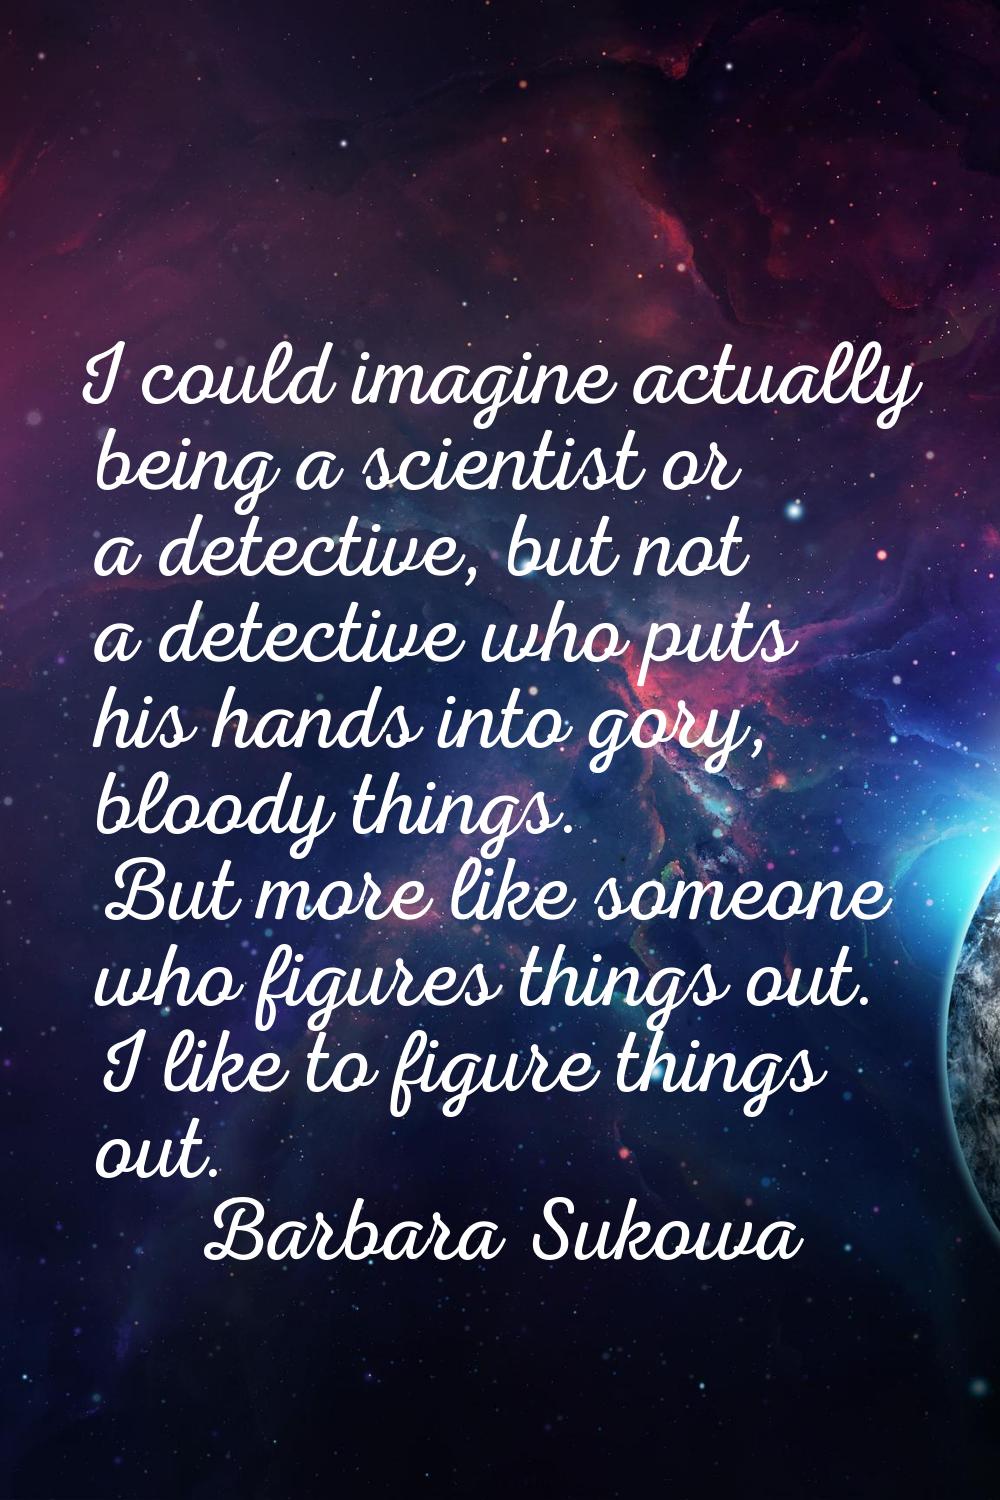 I could imagine actually being a scientist or a detective, but not a detective who puts his hands i